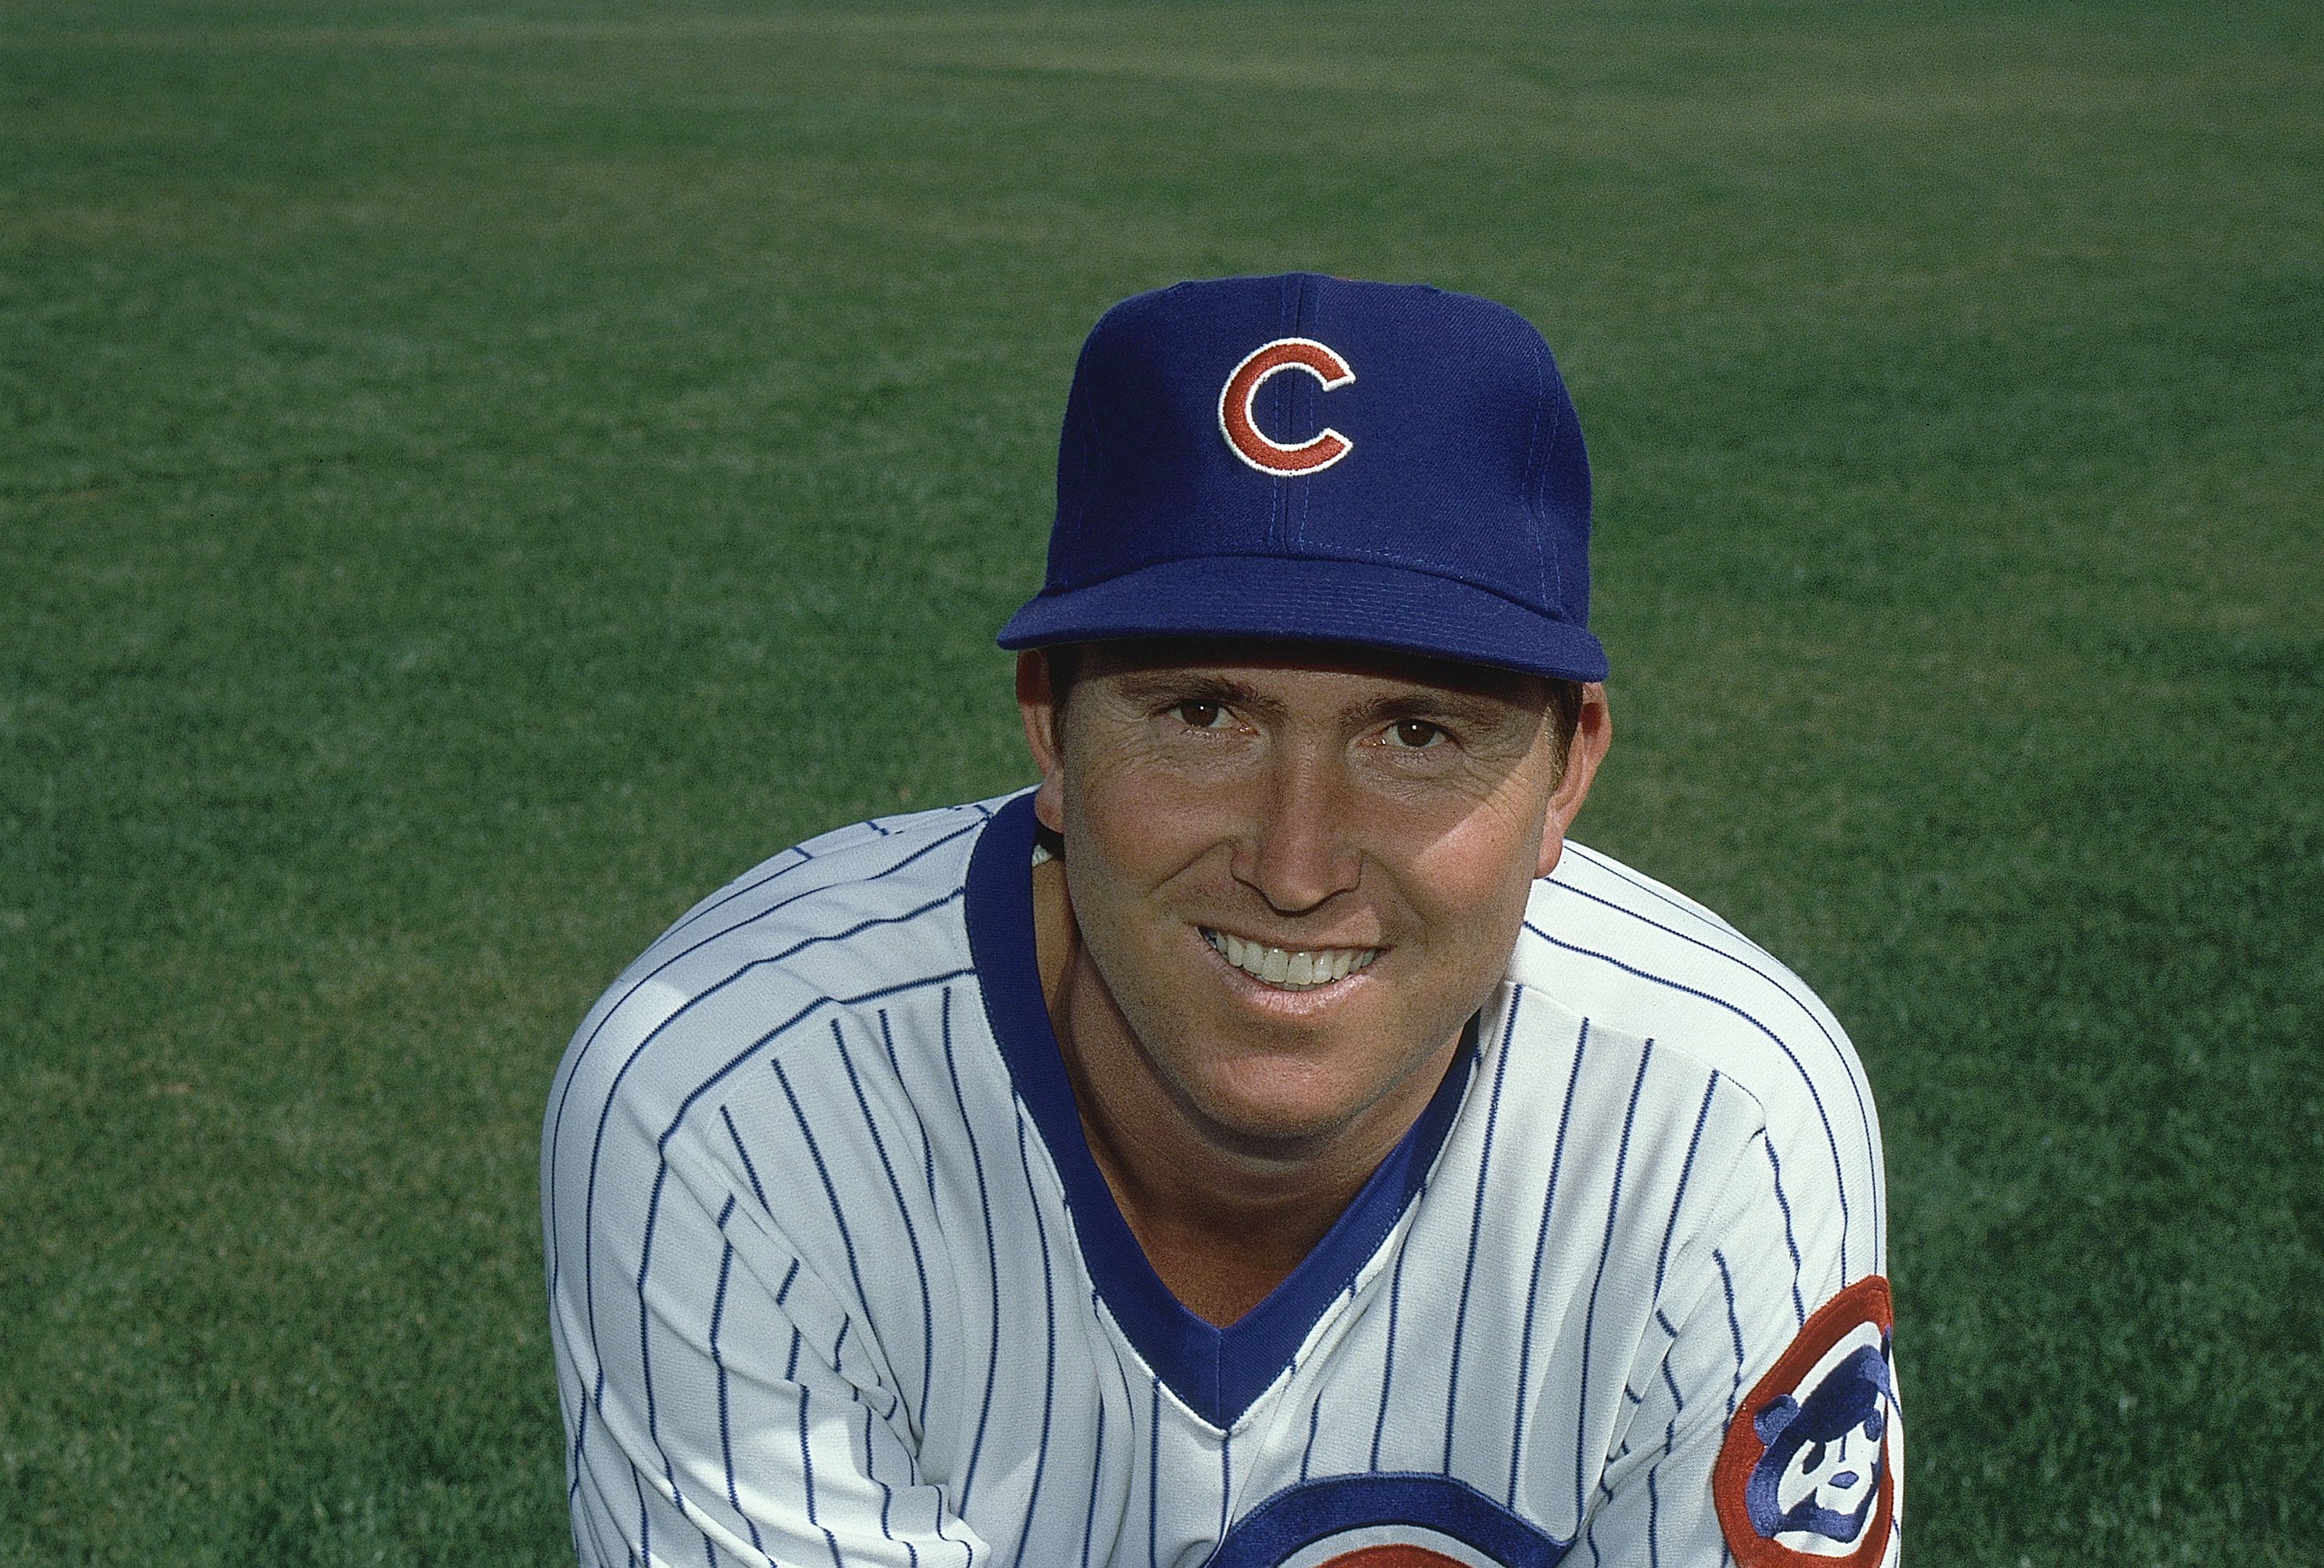 Does former Cubs pitcher and Camp Point native Rick Reuschel